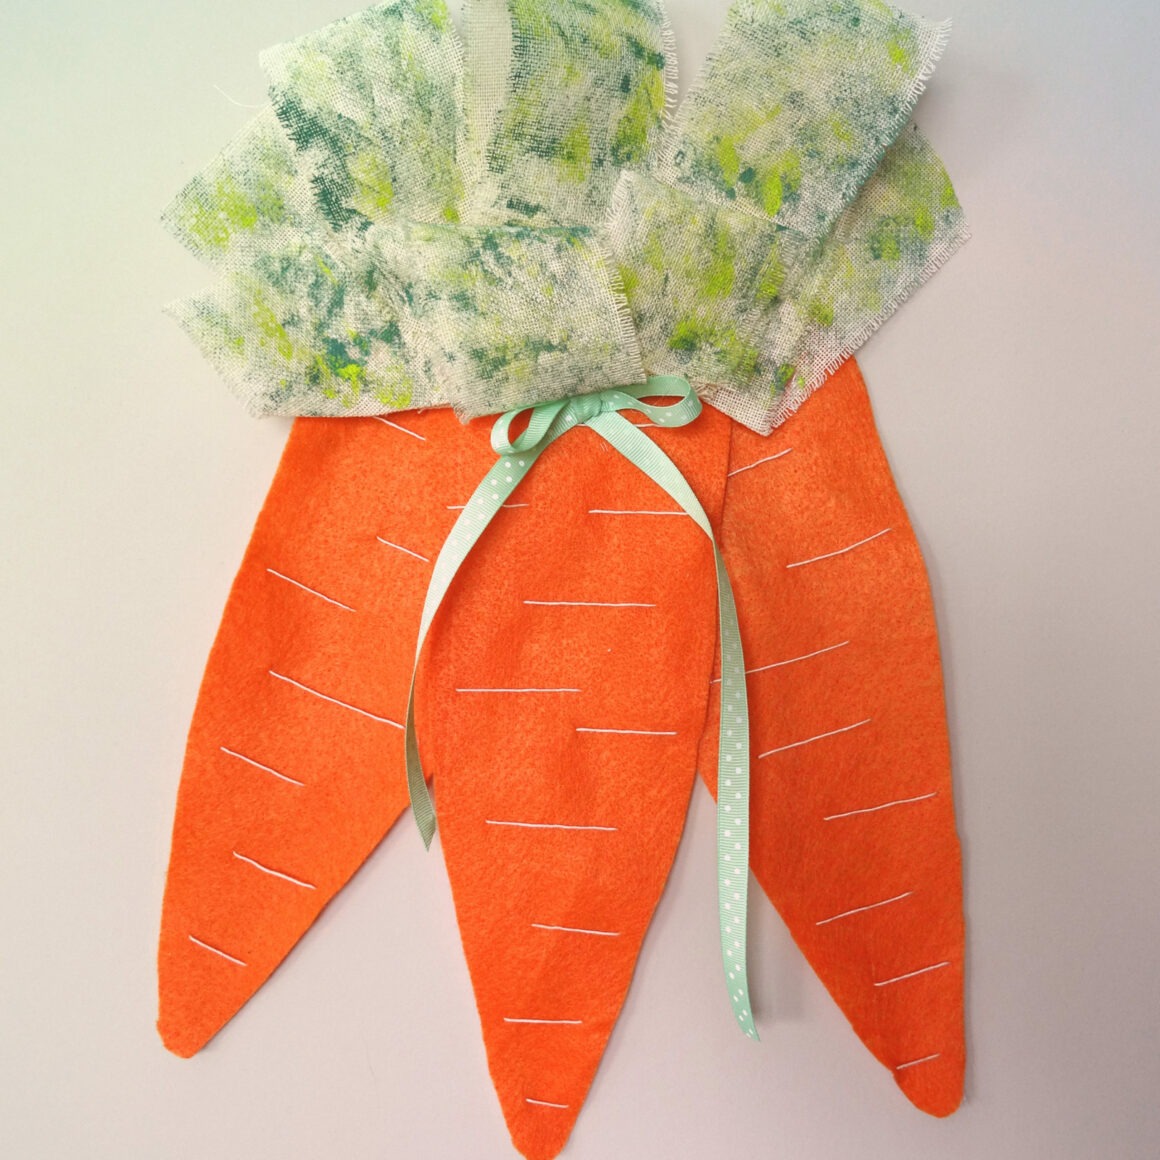 Easy Carrot Door Hanger Easter Craft by Champagne and Sugarplums